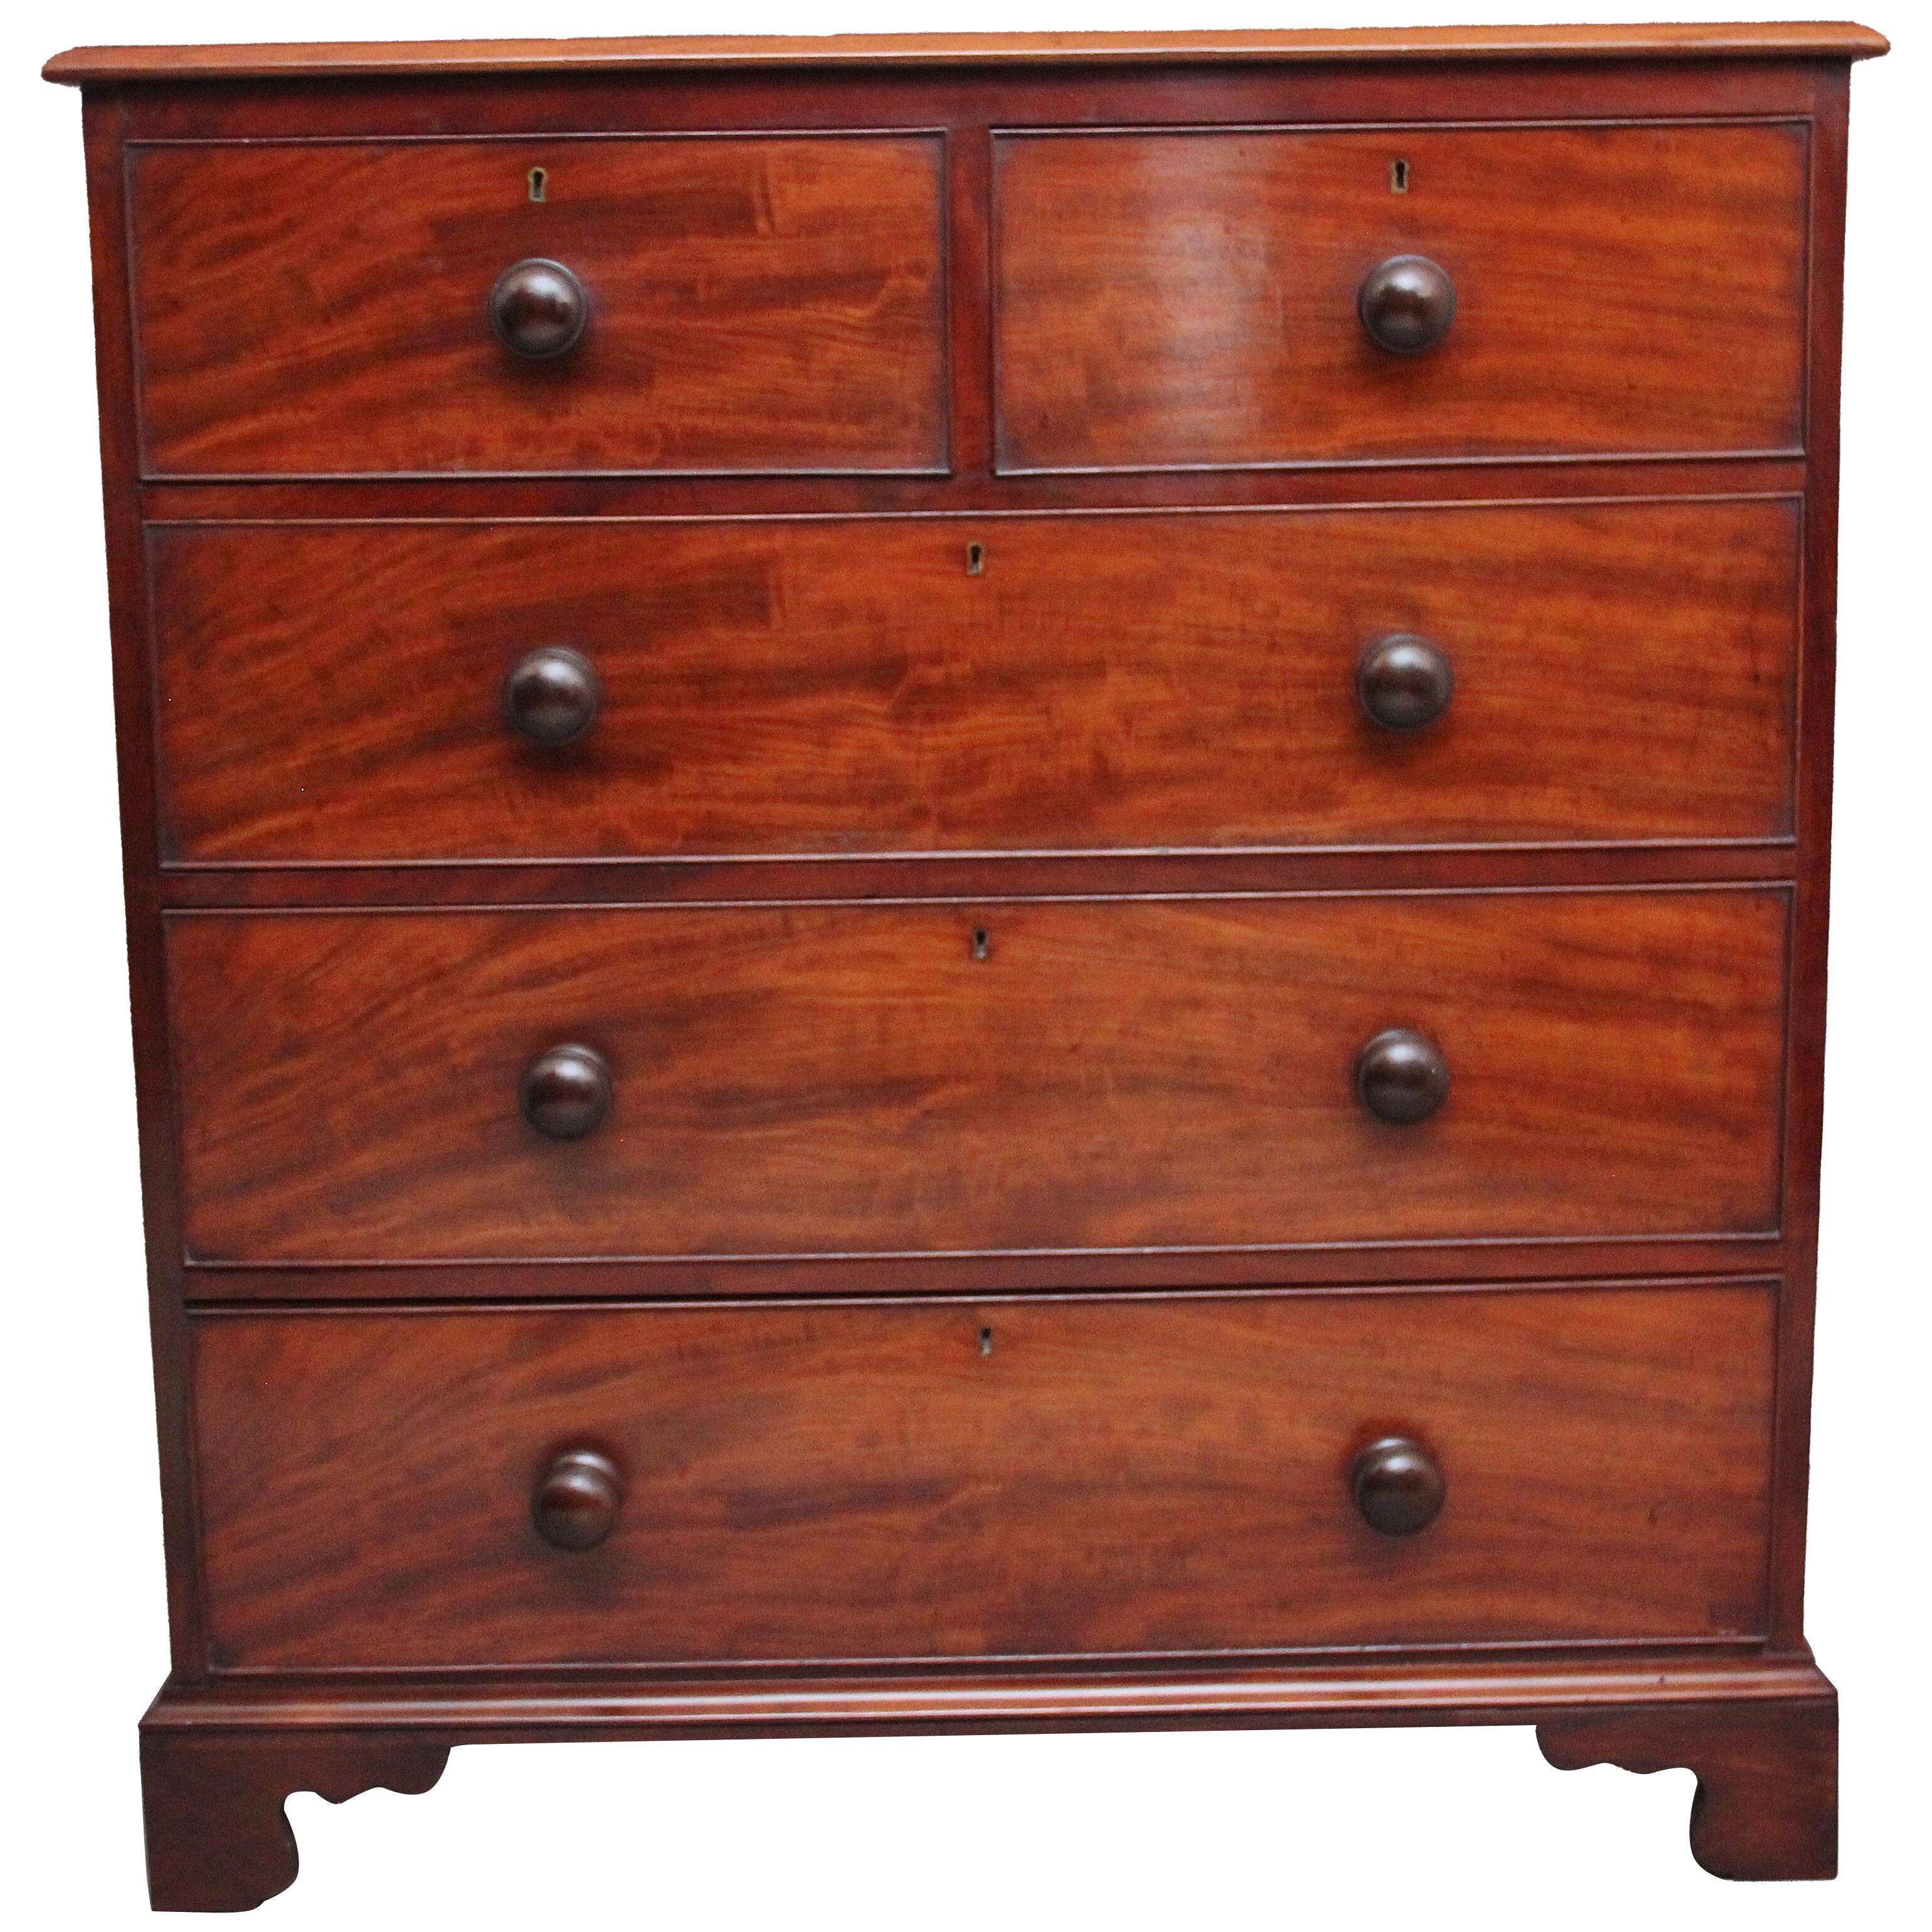 19th Century antique mahogany chest of drawers